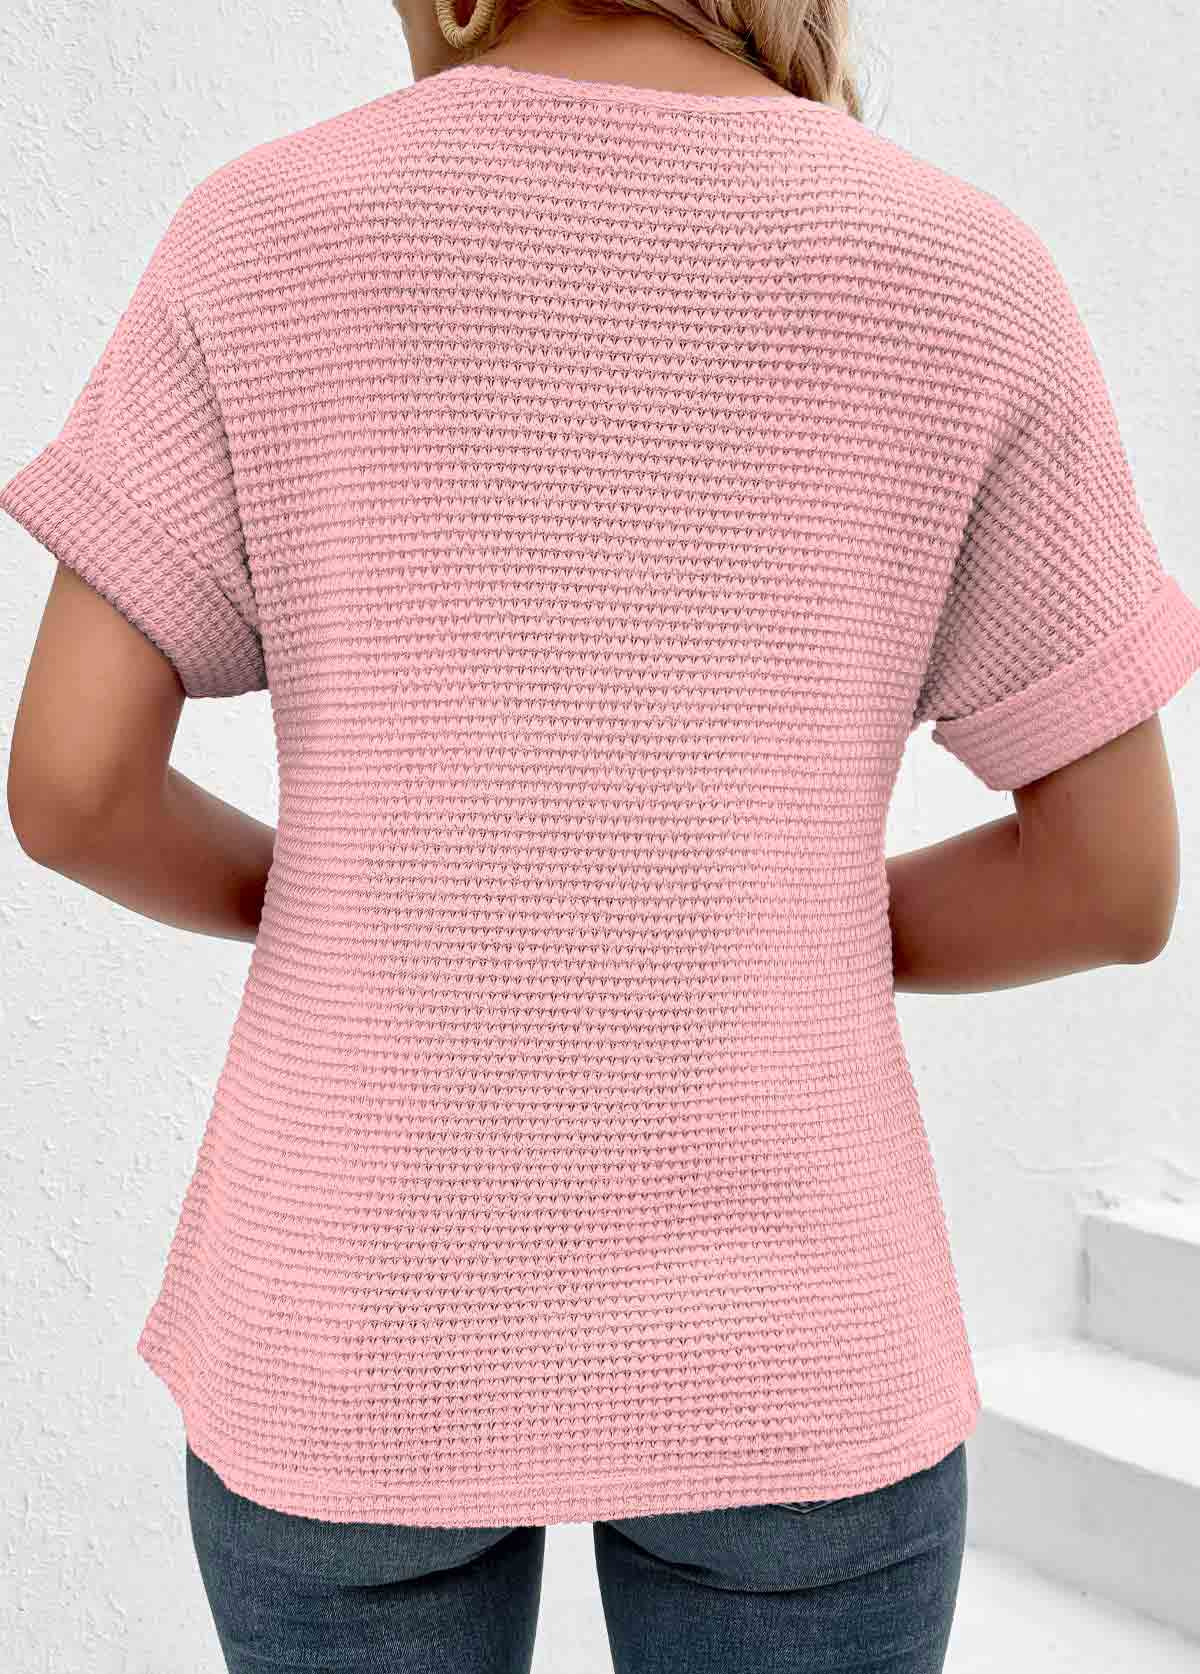 Dazzle Colorful Print Patchwork Pink Short Sleeve T Shirt